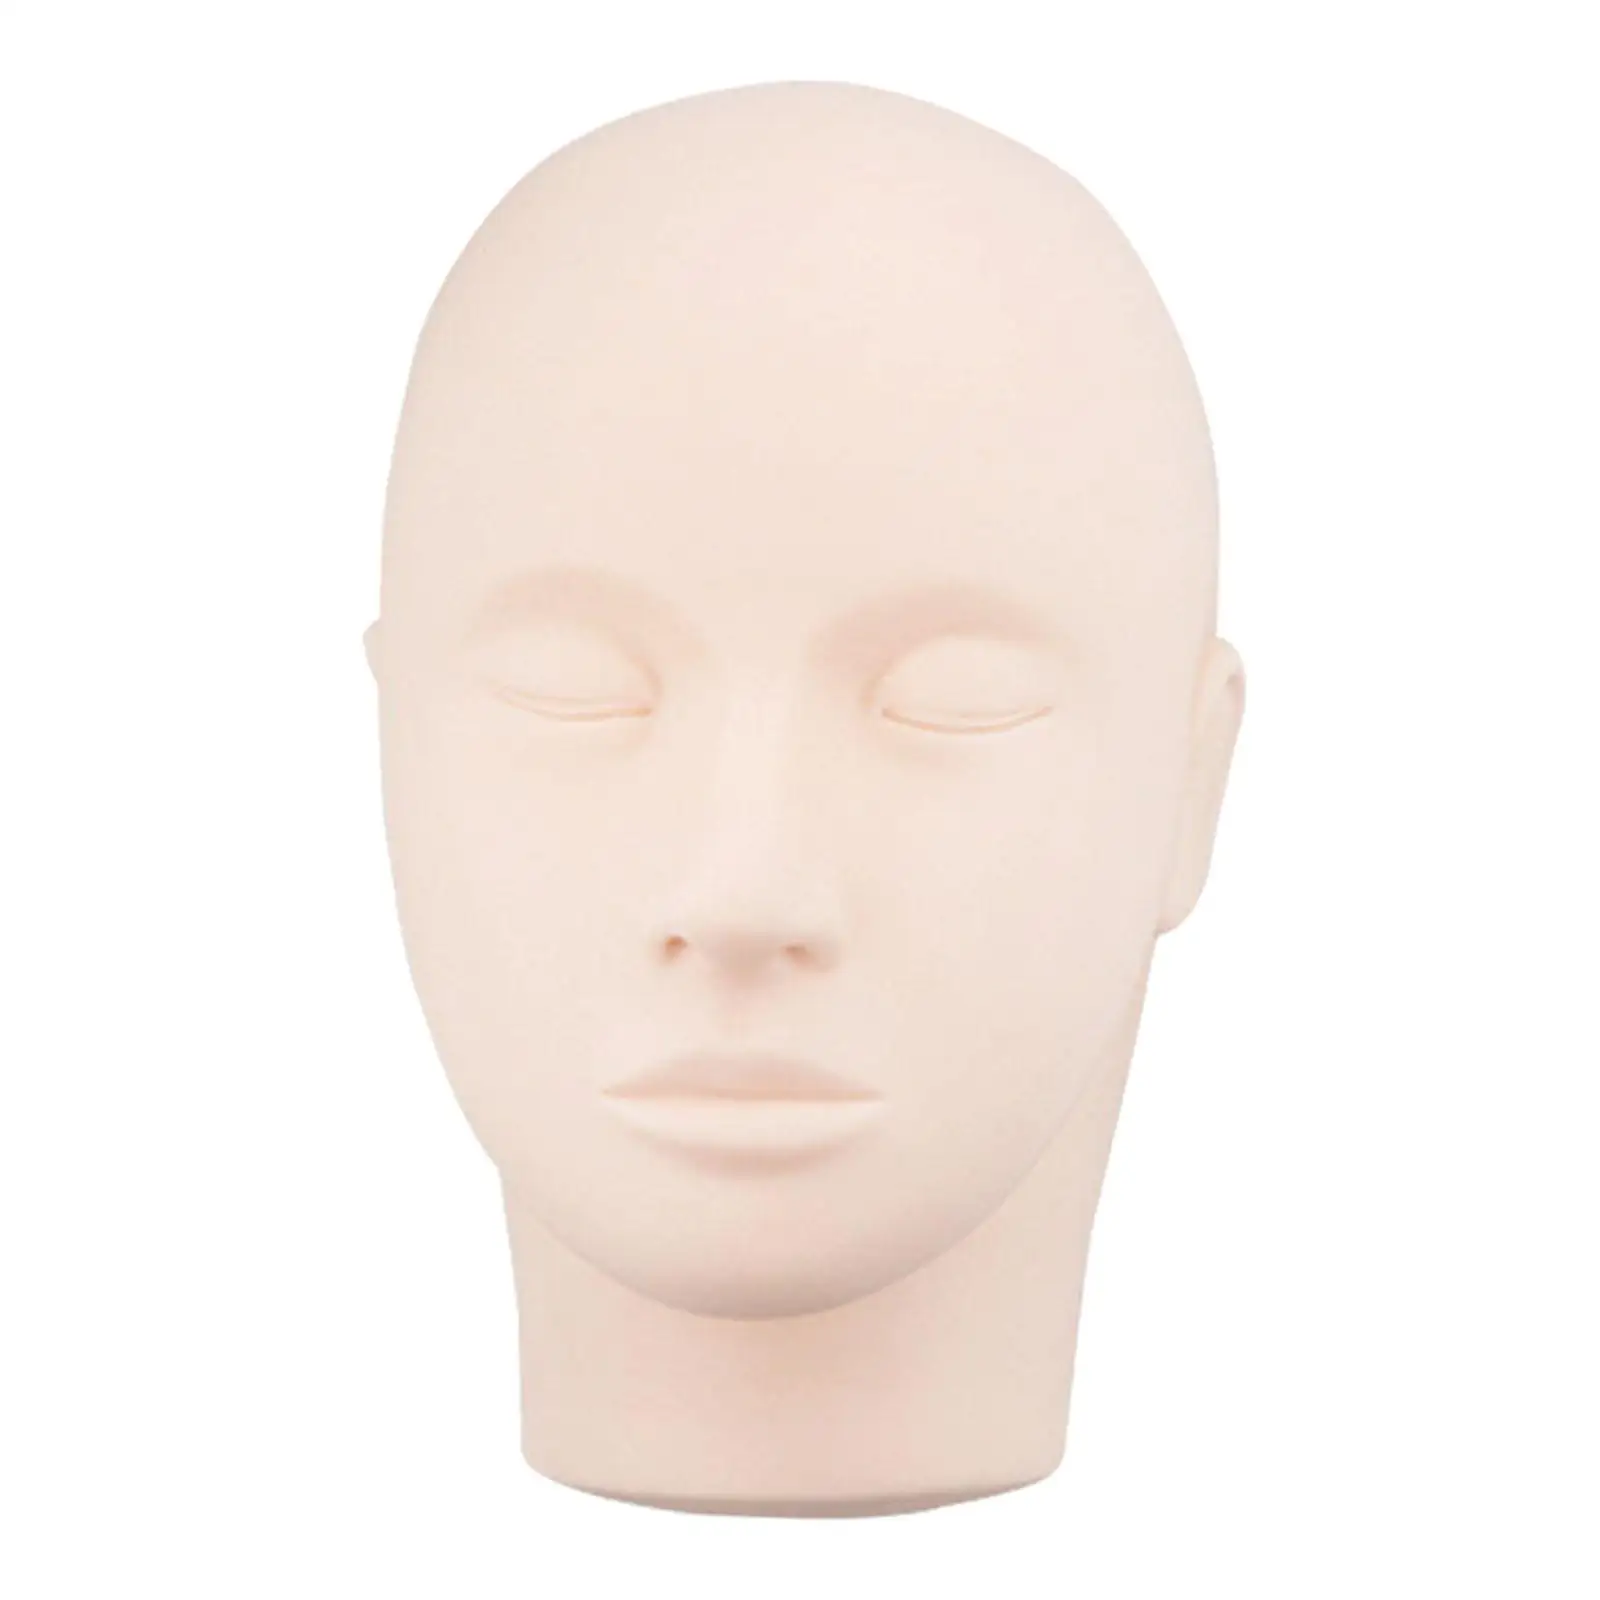 Extension Silicone Head Extension Supplies/ /Soft Touch Head for Practice/ Make up Training